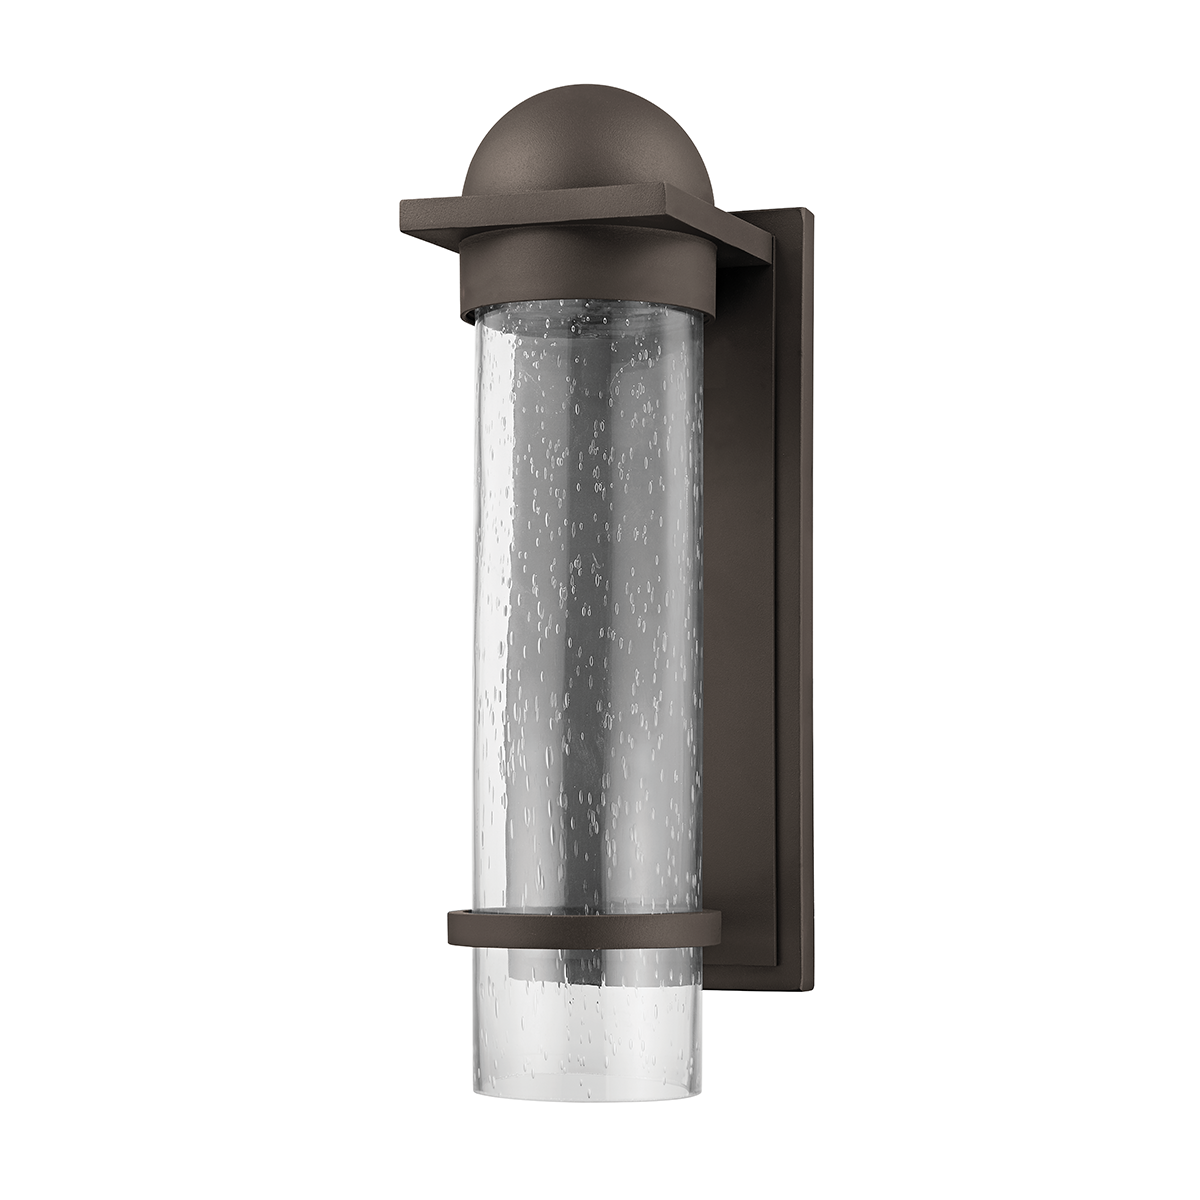 Troy Lighting 1 LIGHT LARGE EXTERIOR WALL SCONCE B7116 Outdoor l Wall Troy Lighting TEXTURED BRONZE  